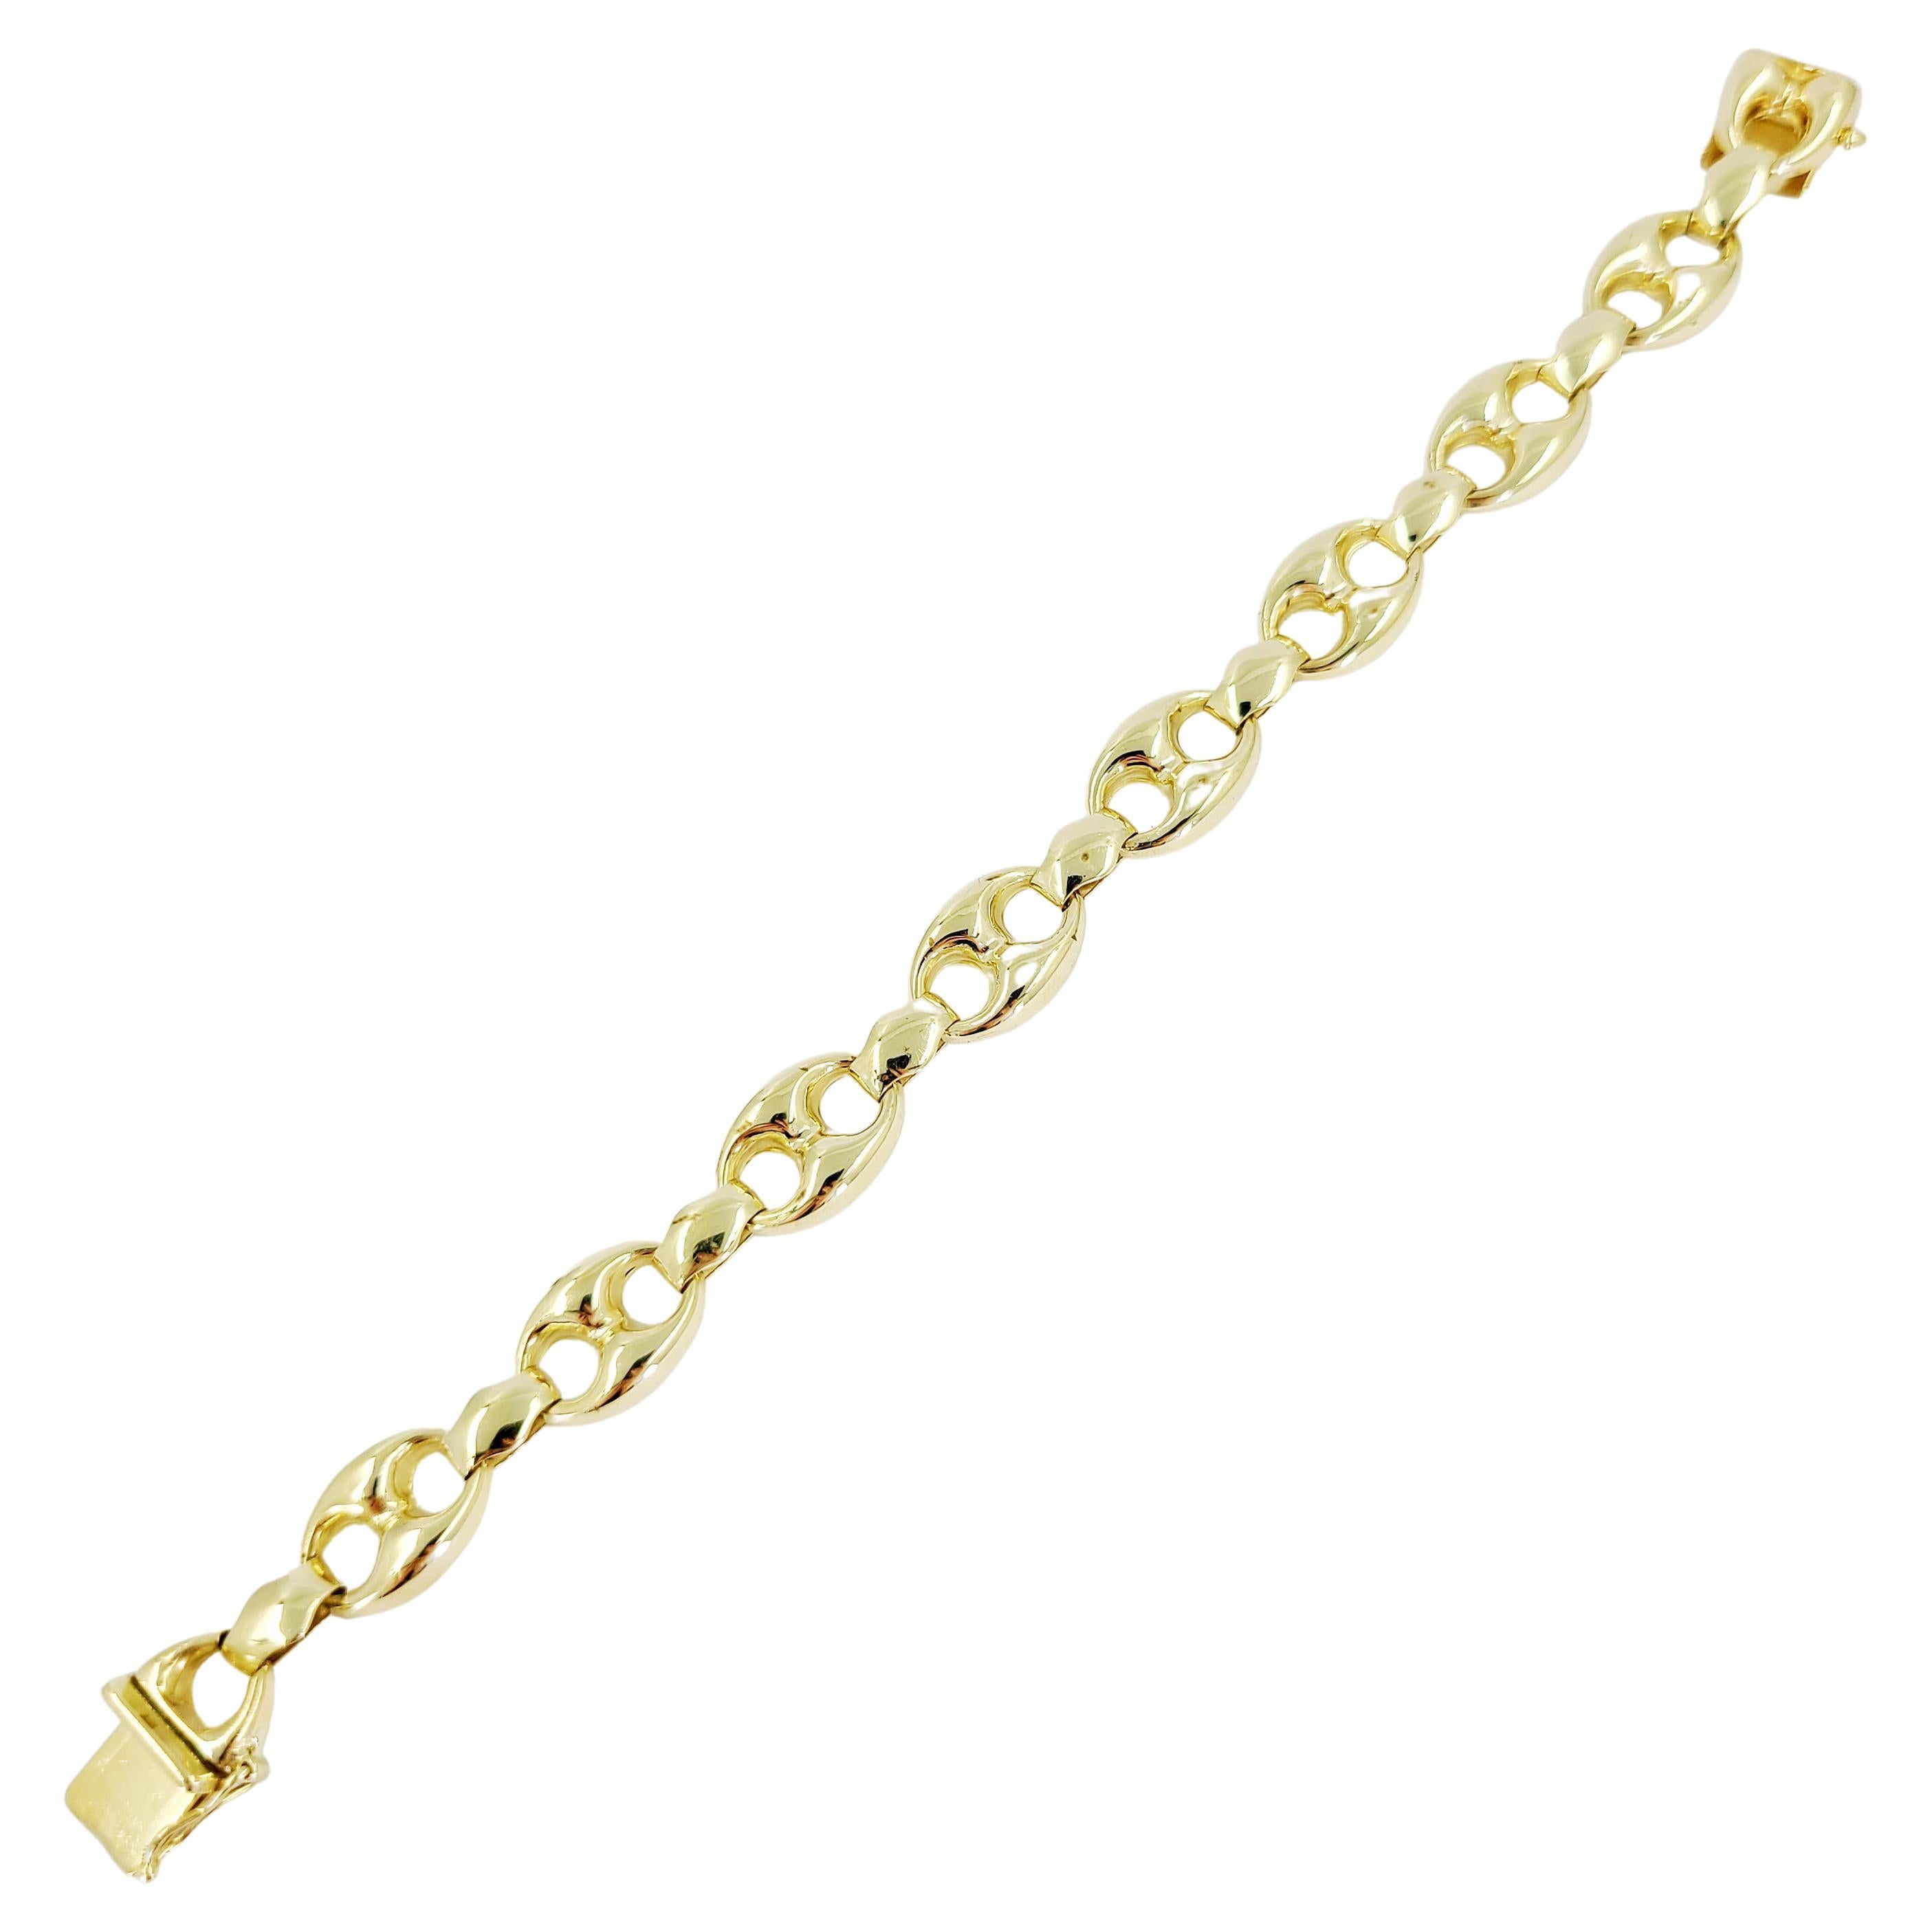 Yellow Gold Gucci Style Link Bracelet